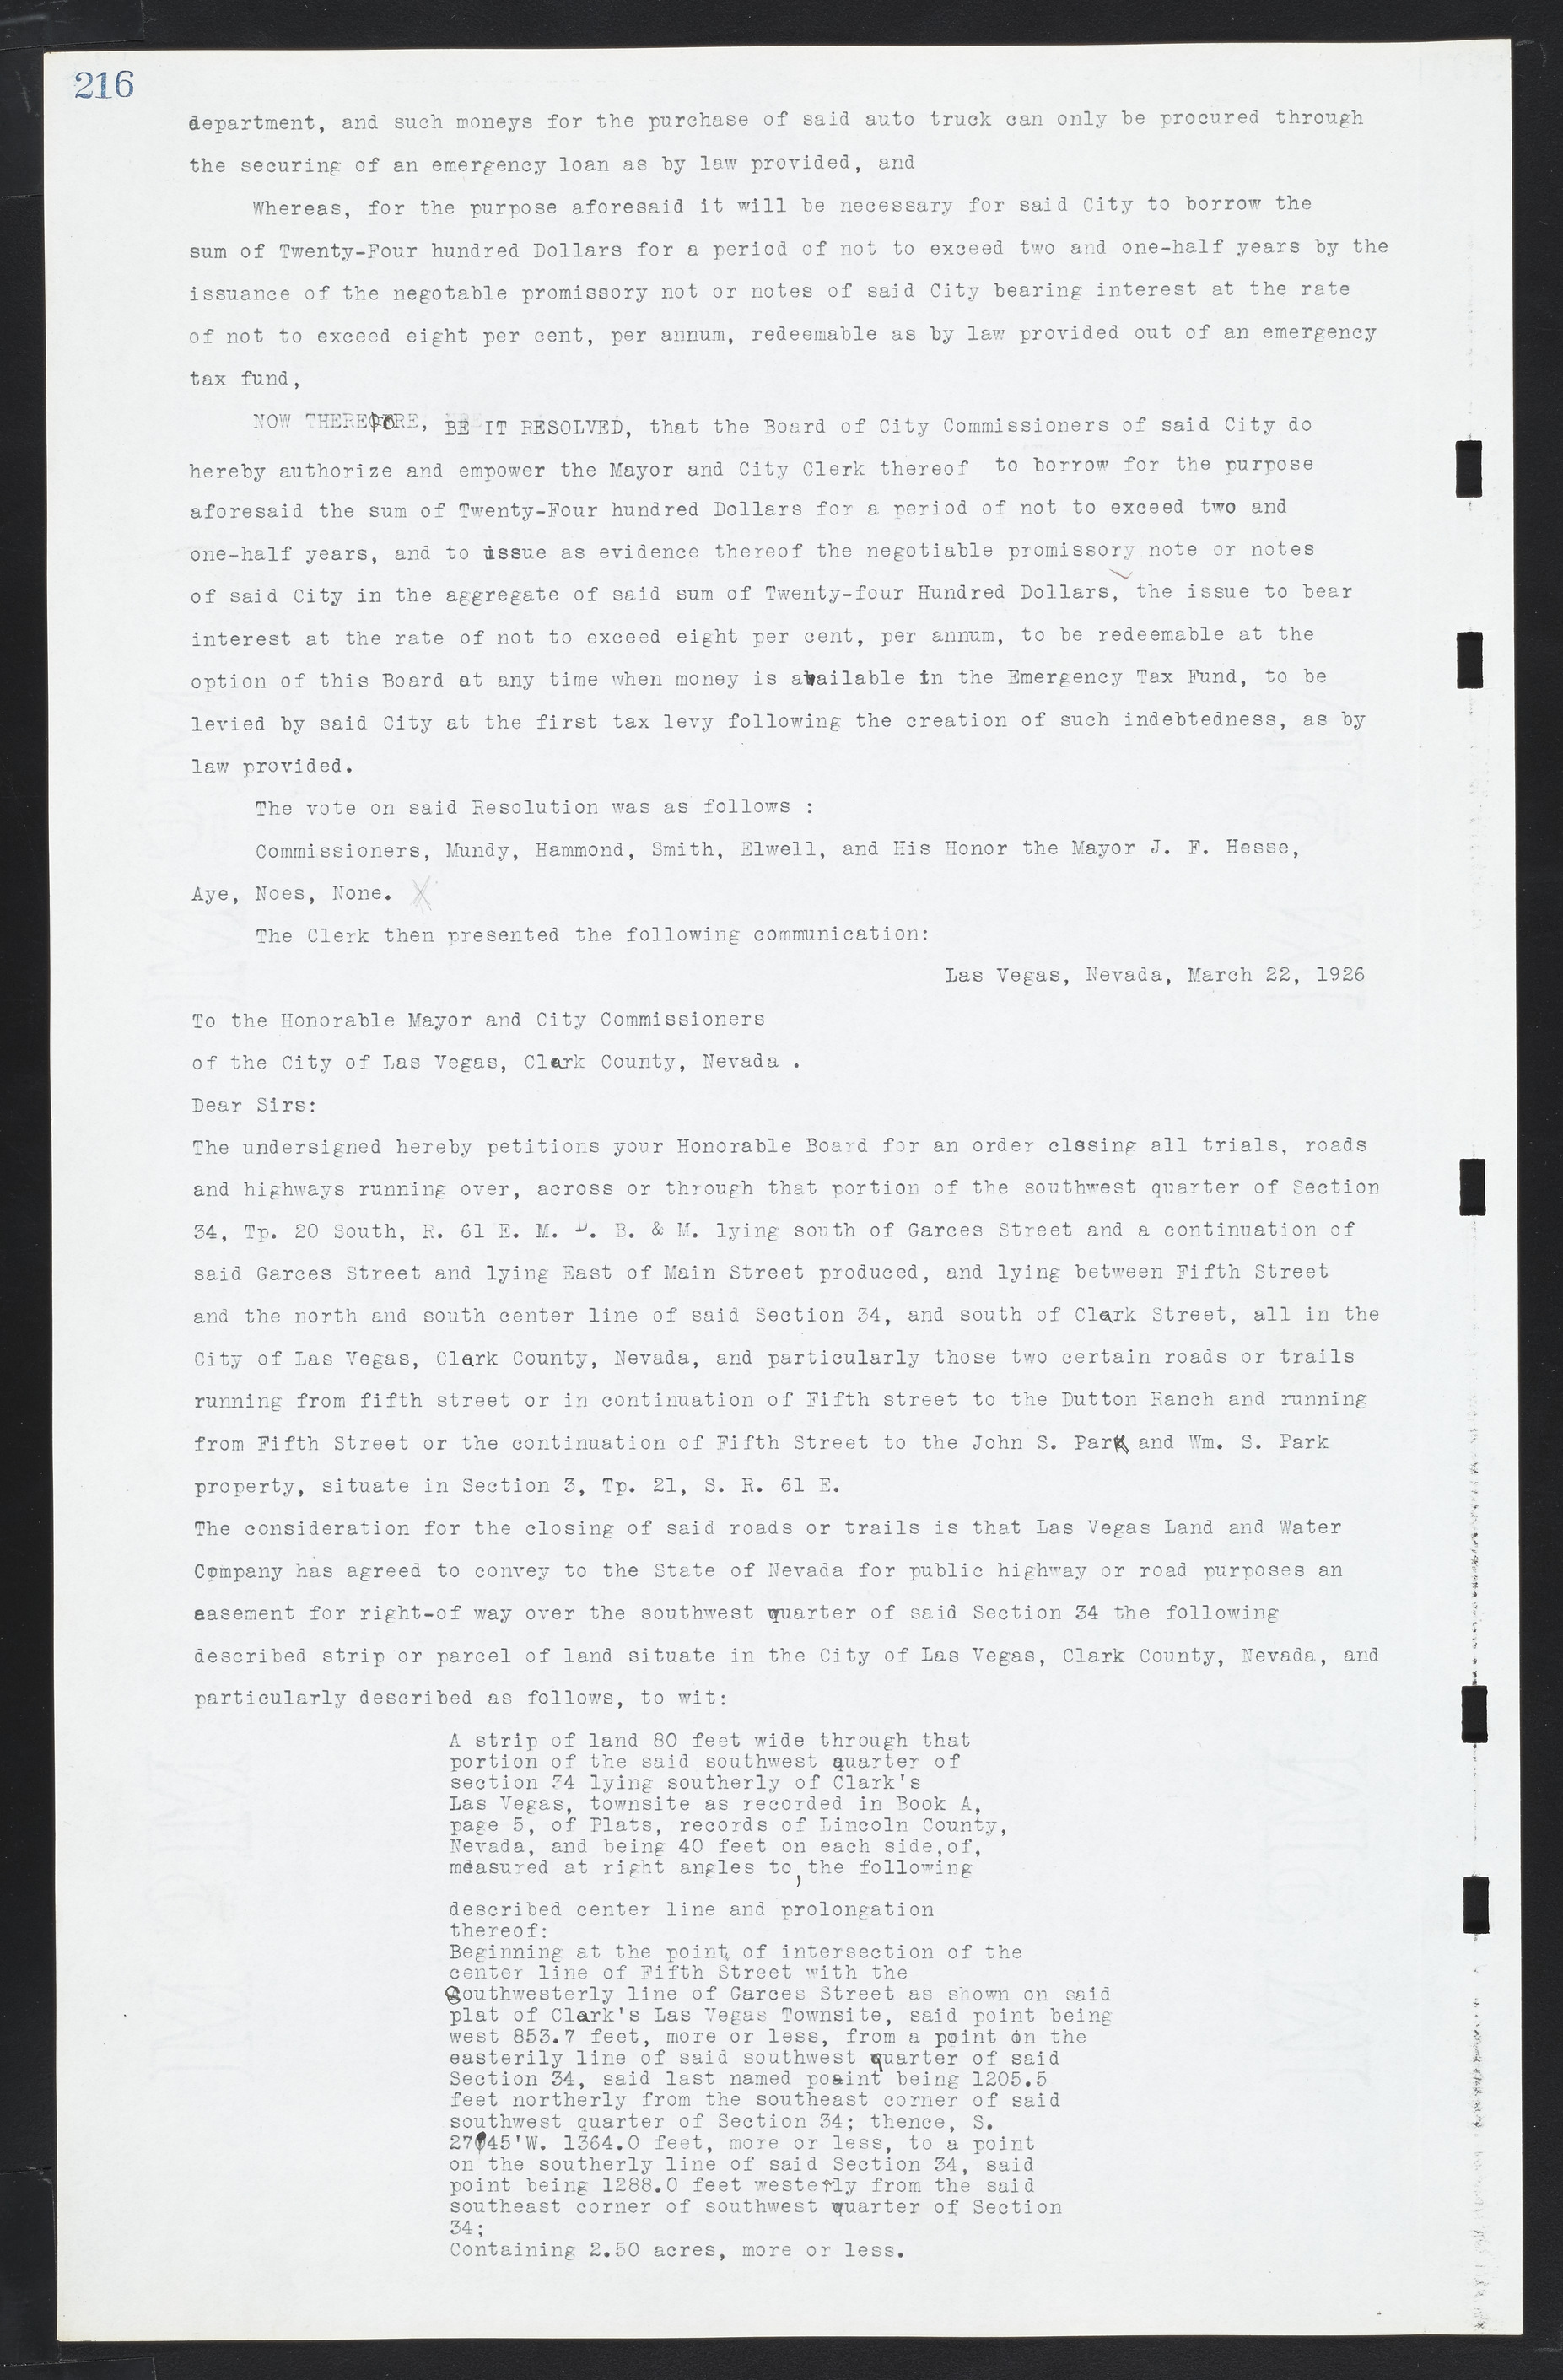 Las Vegas City Commission Minutes, March 1, 1922 to May 10, 1929, lvc000002-223